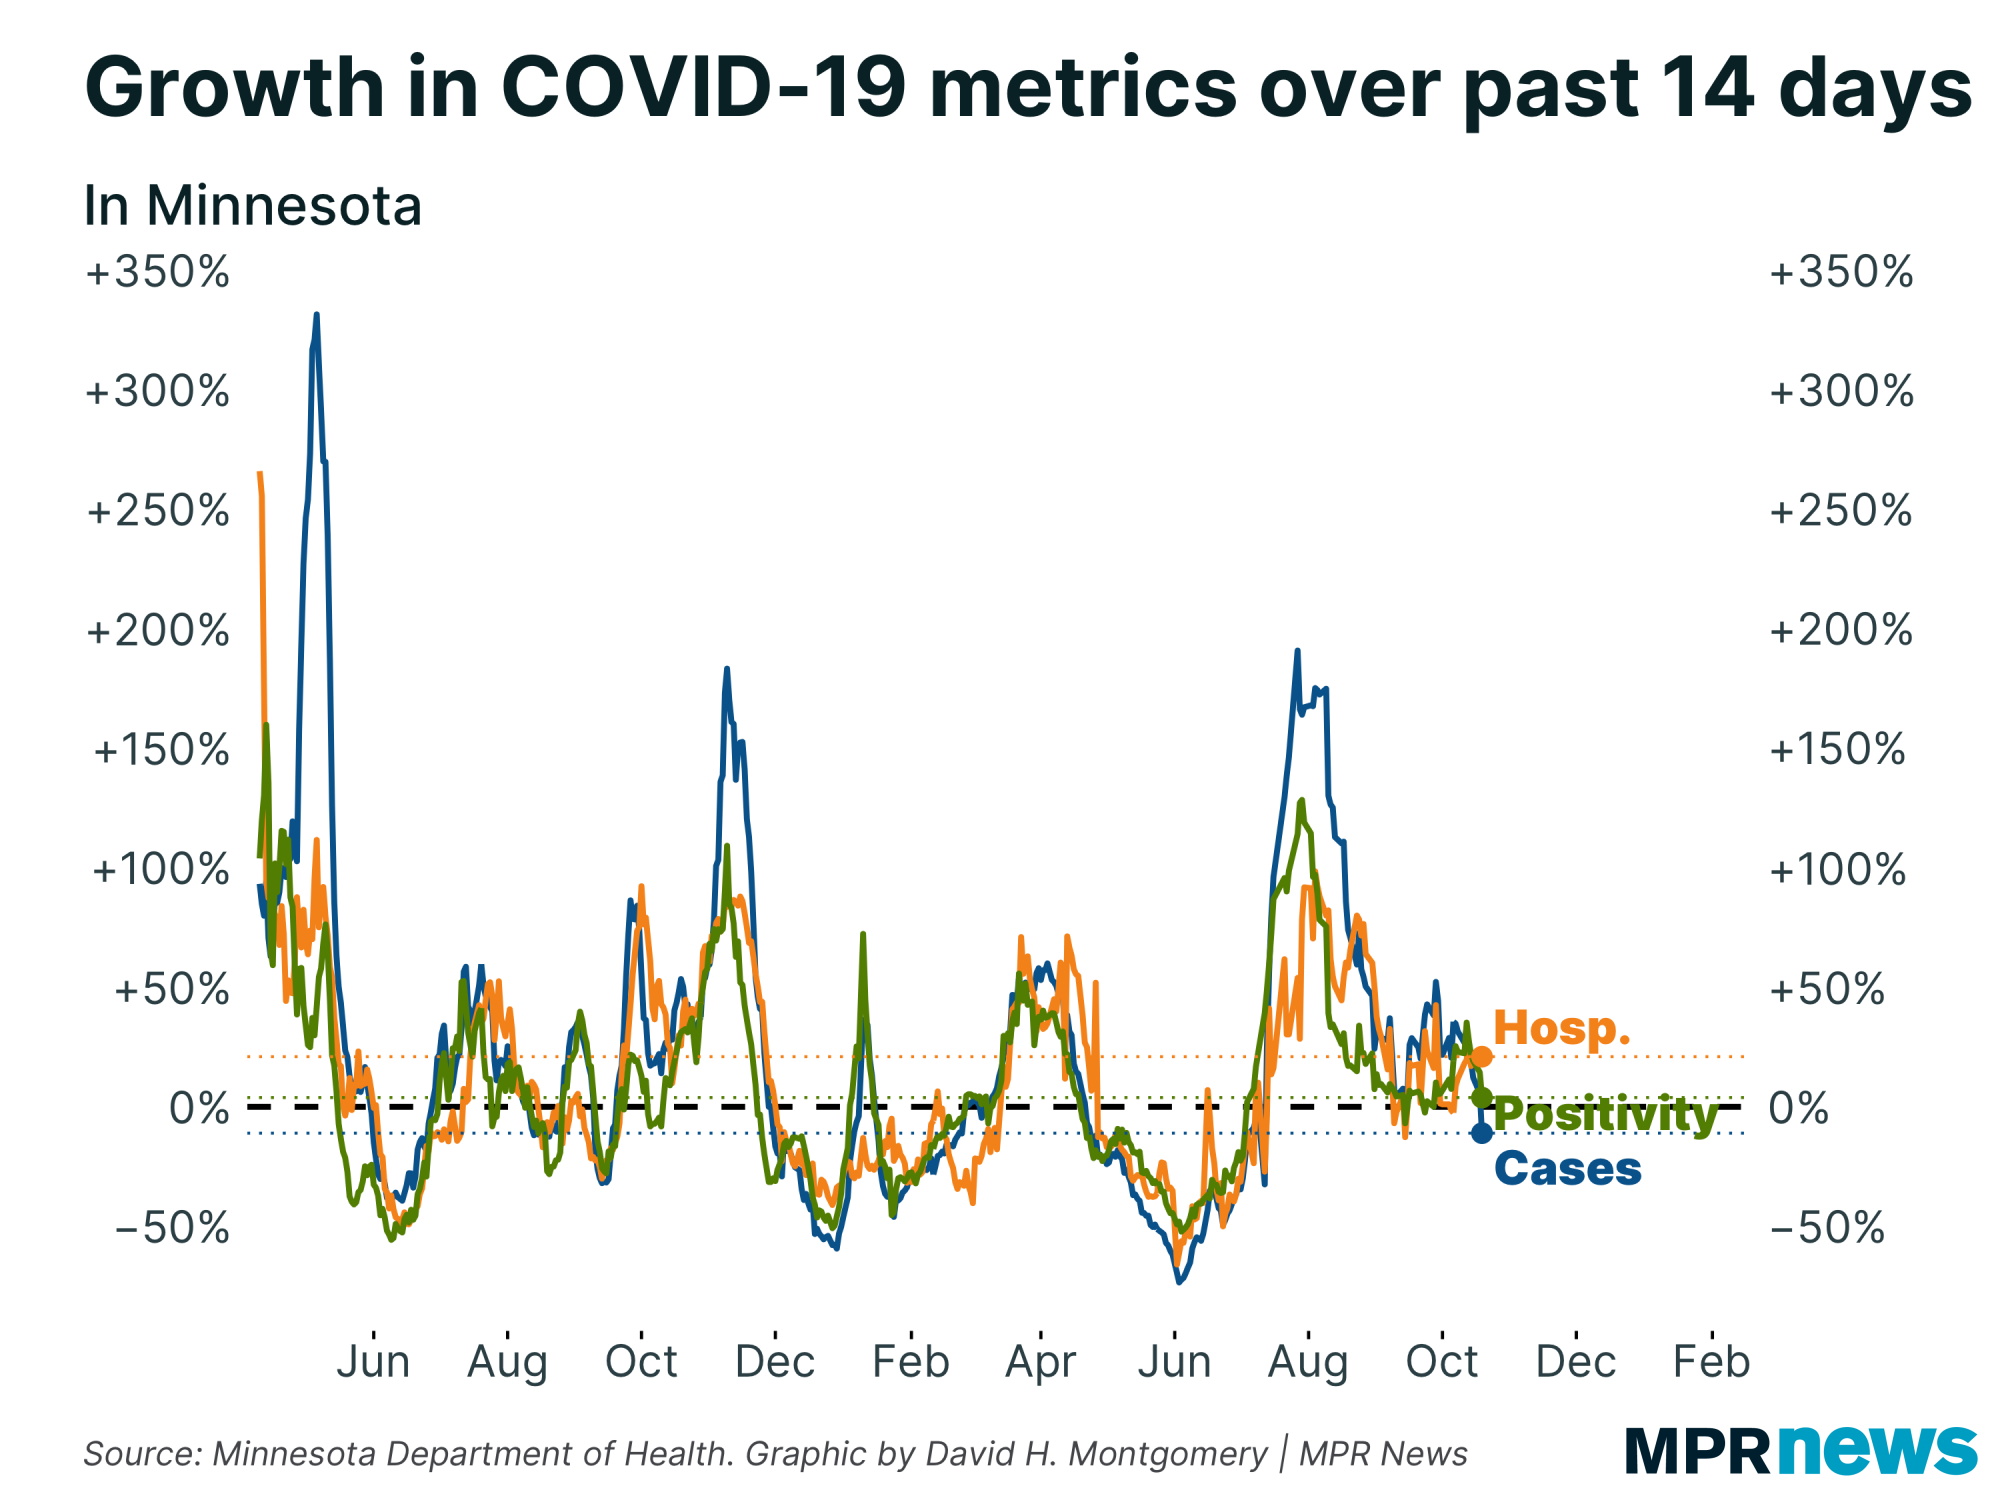 Graph of growth in COVID-19 metrics over the past 14 days